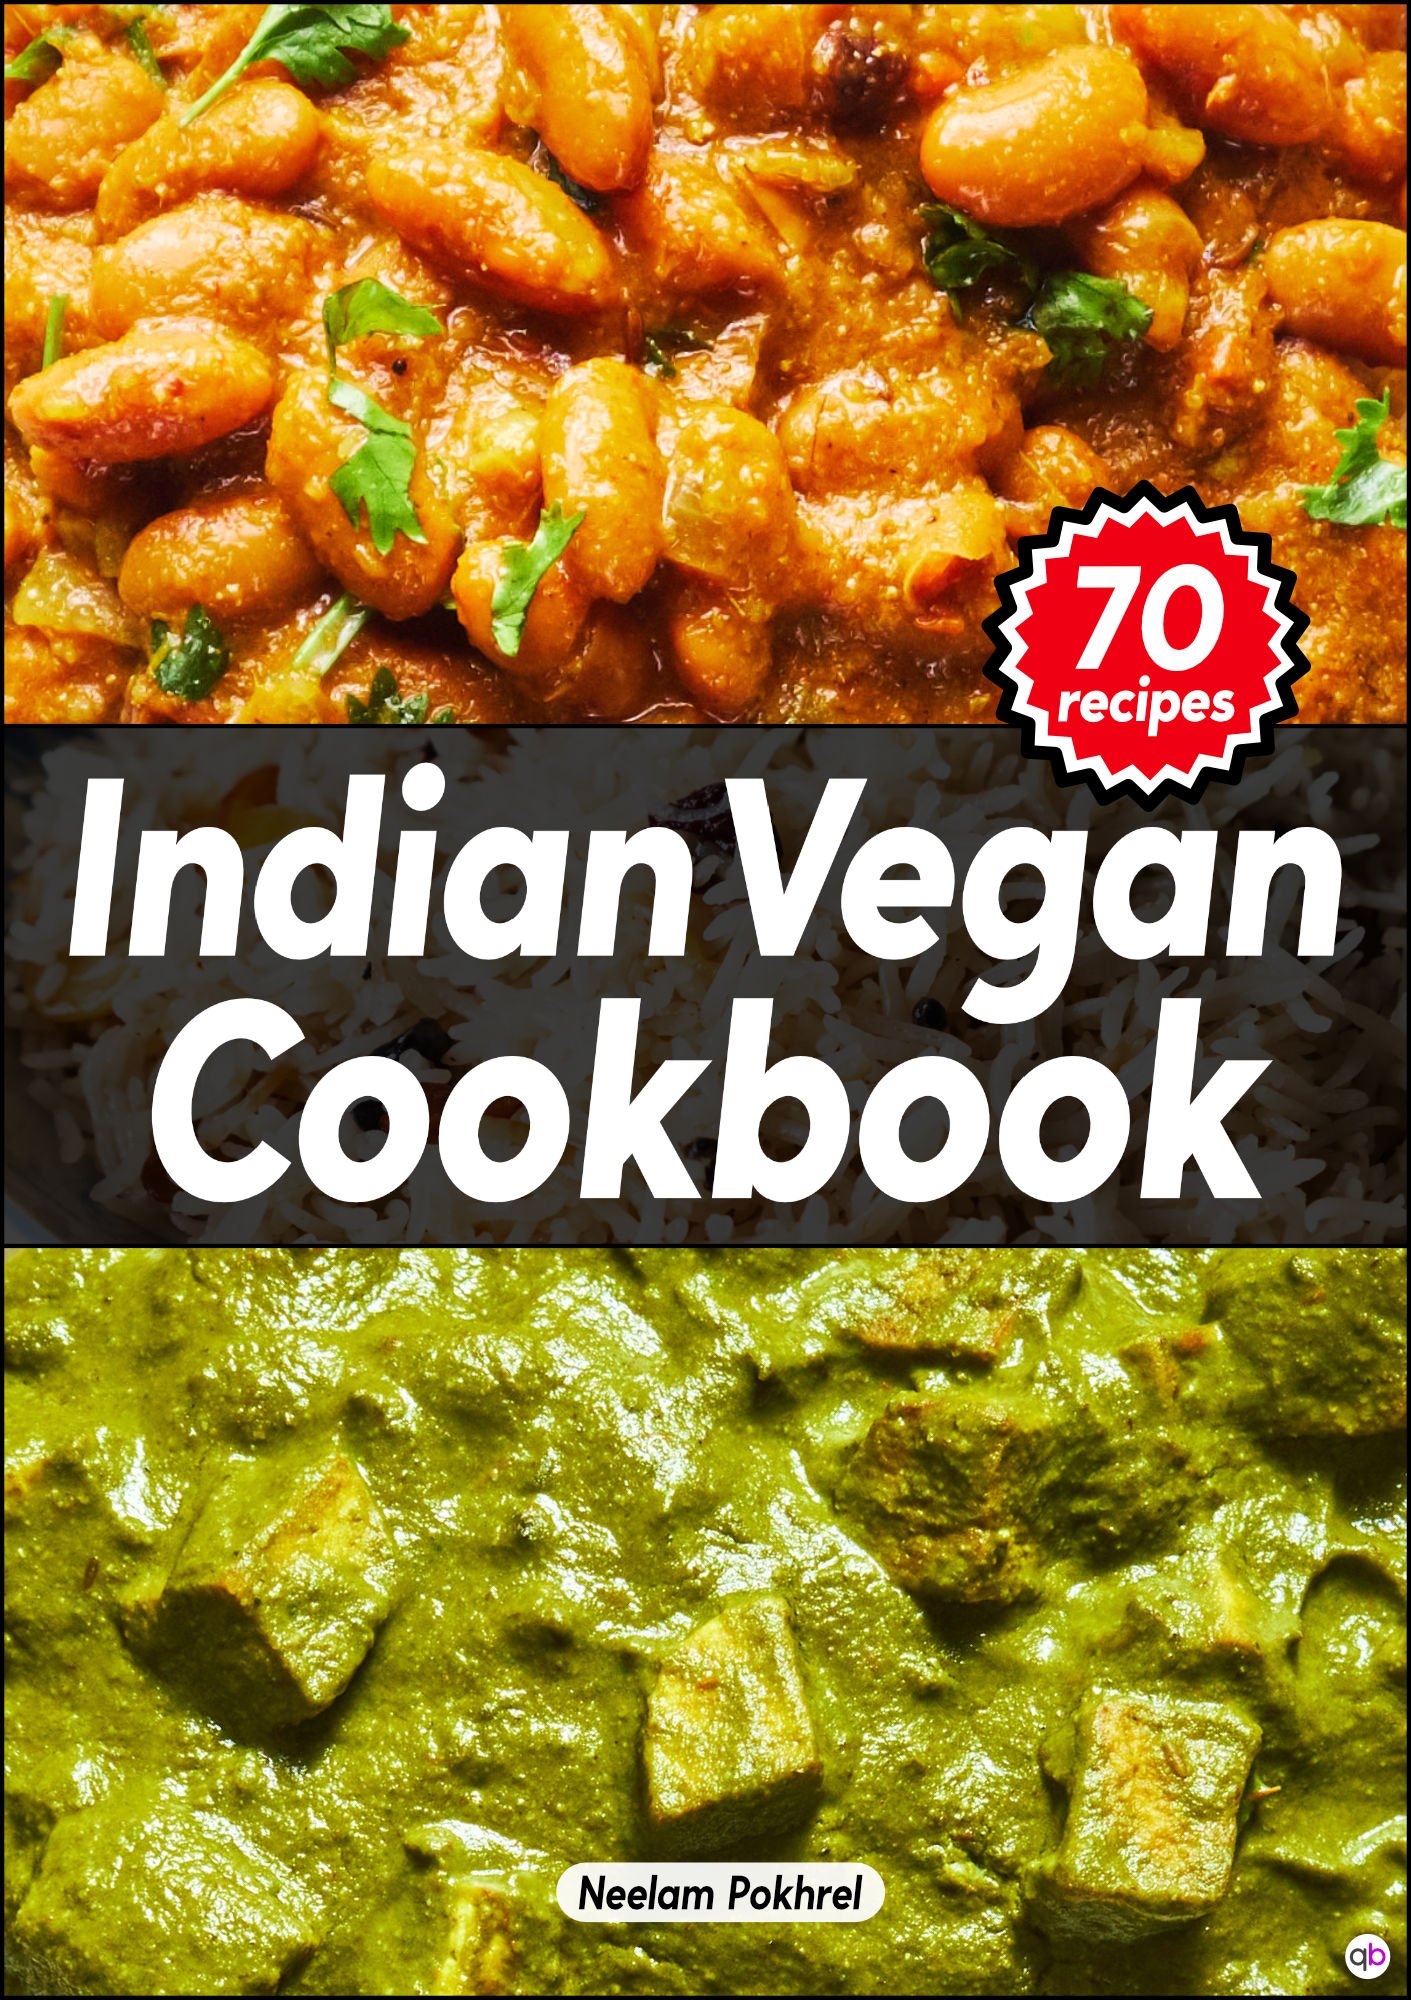 Veganbell's Indian Vegan Cookbook : 70 Plant-Based Recipes For Absolute Beginners